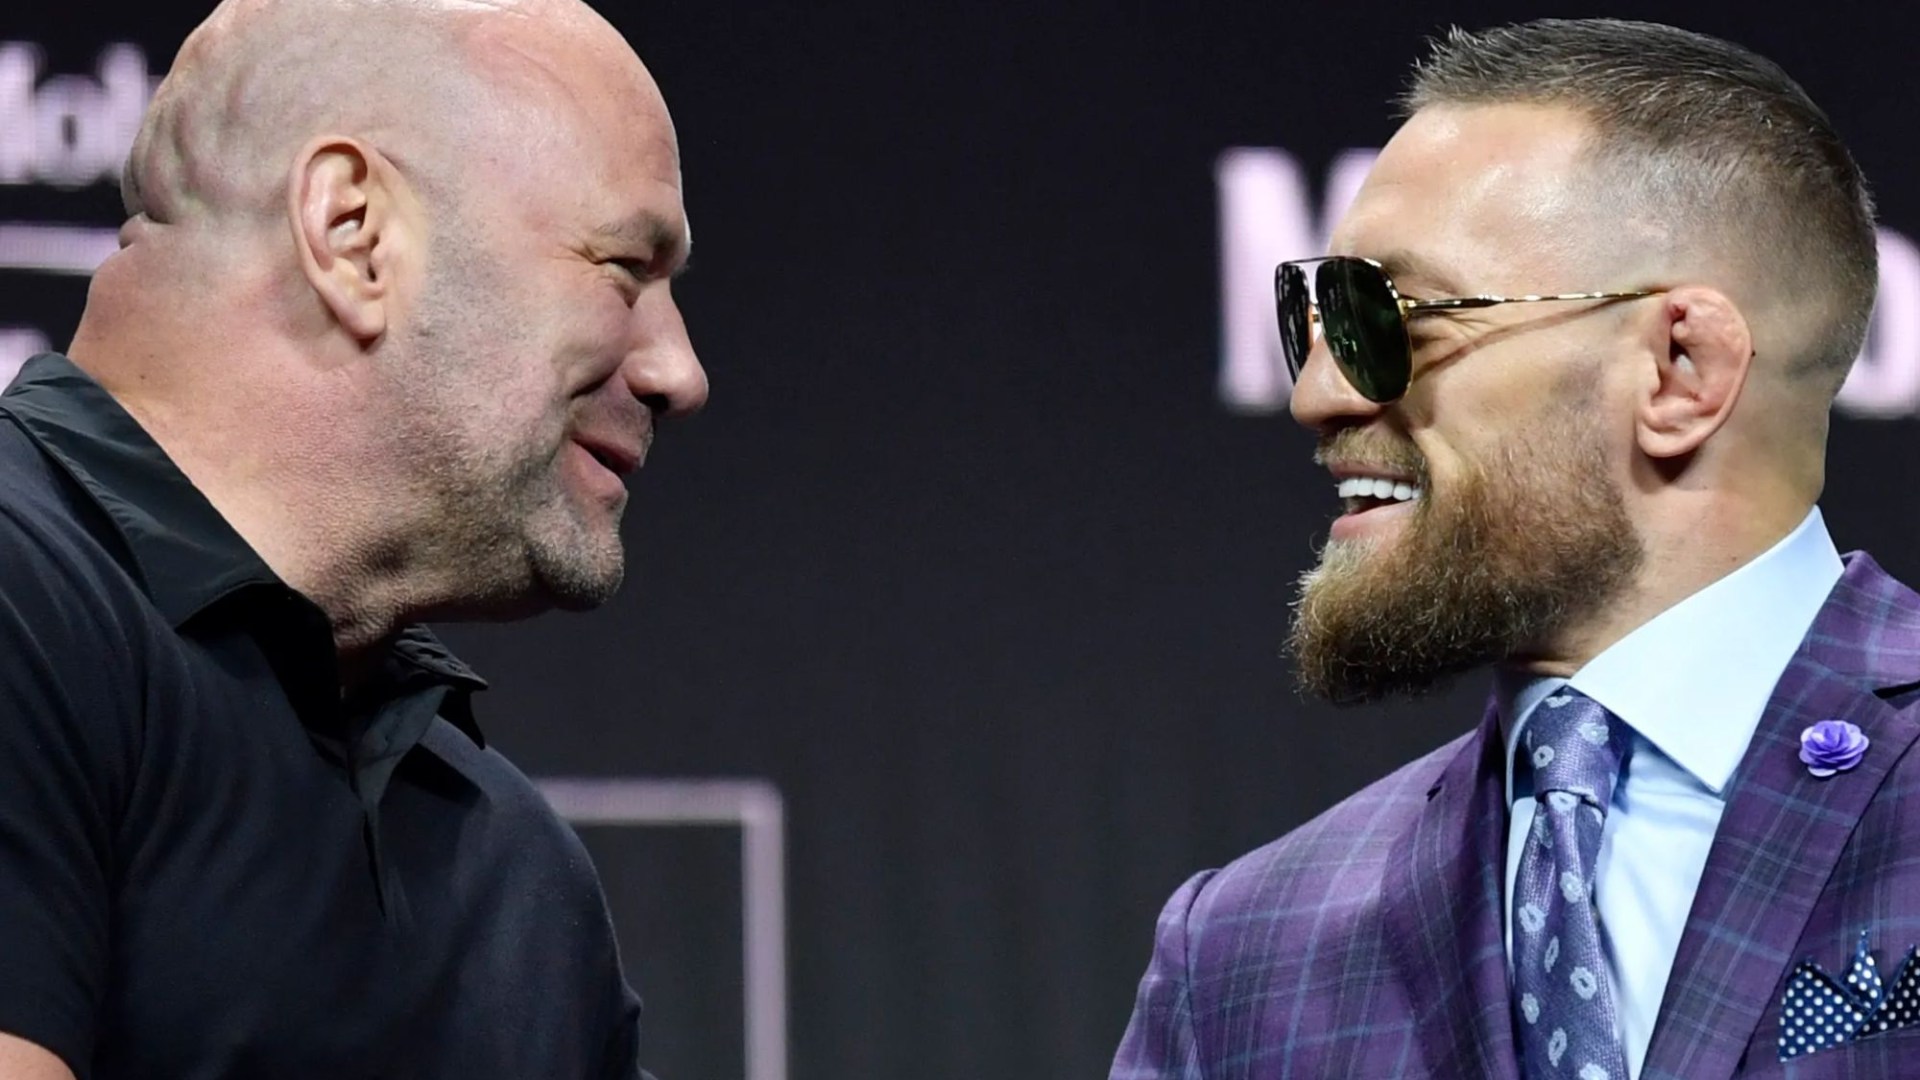 ‘Coming soon…’ – UFC chief Dana White teases massive Conor McGregor return with cryptic Instagram post [Video]